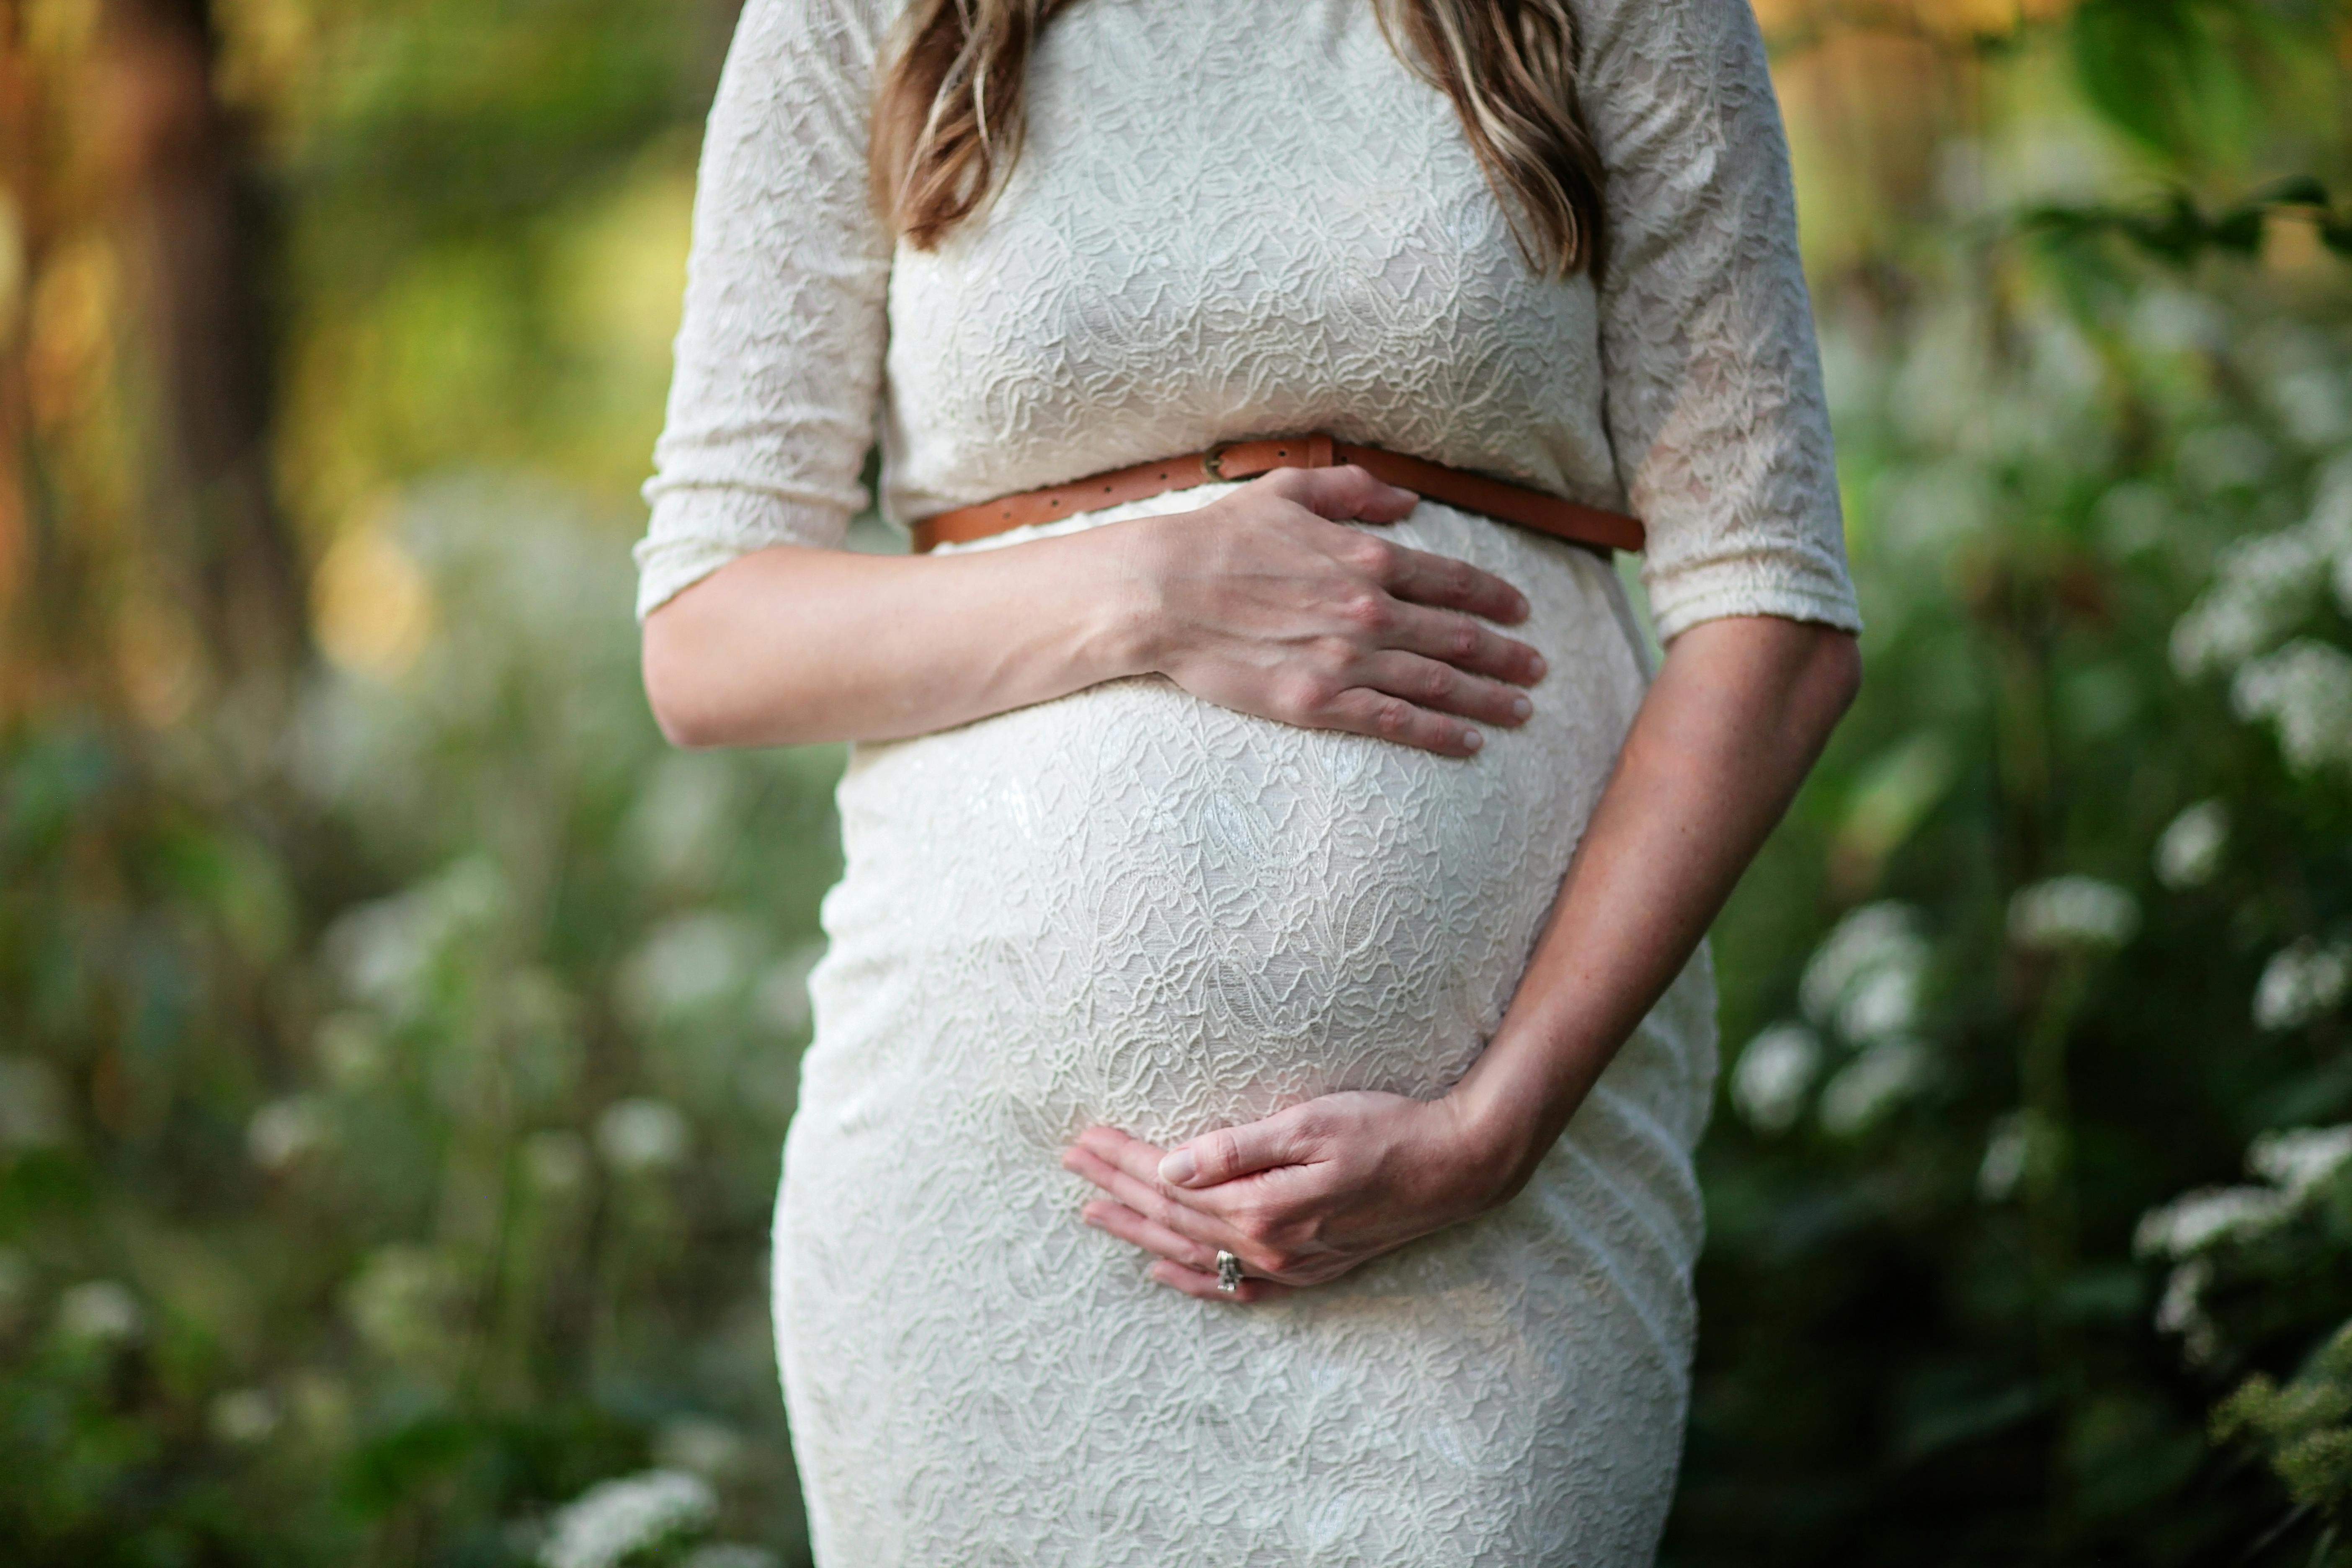 A pregnant woman holding her belly | Source: Pexels